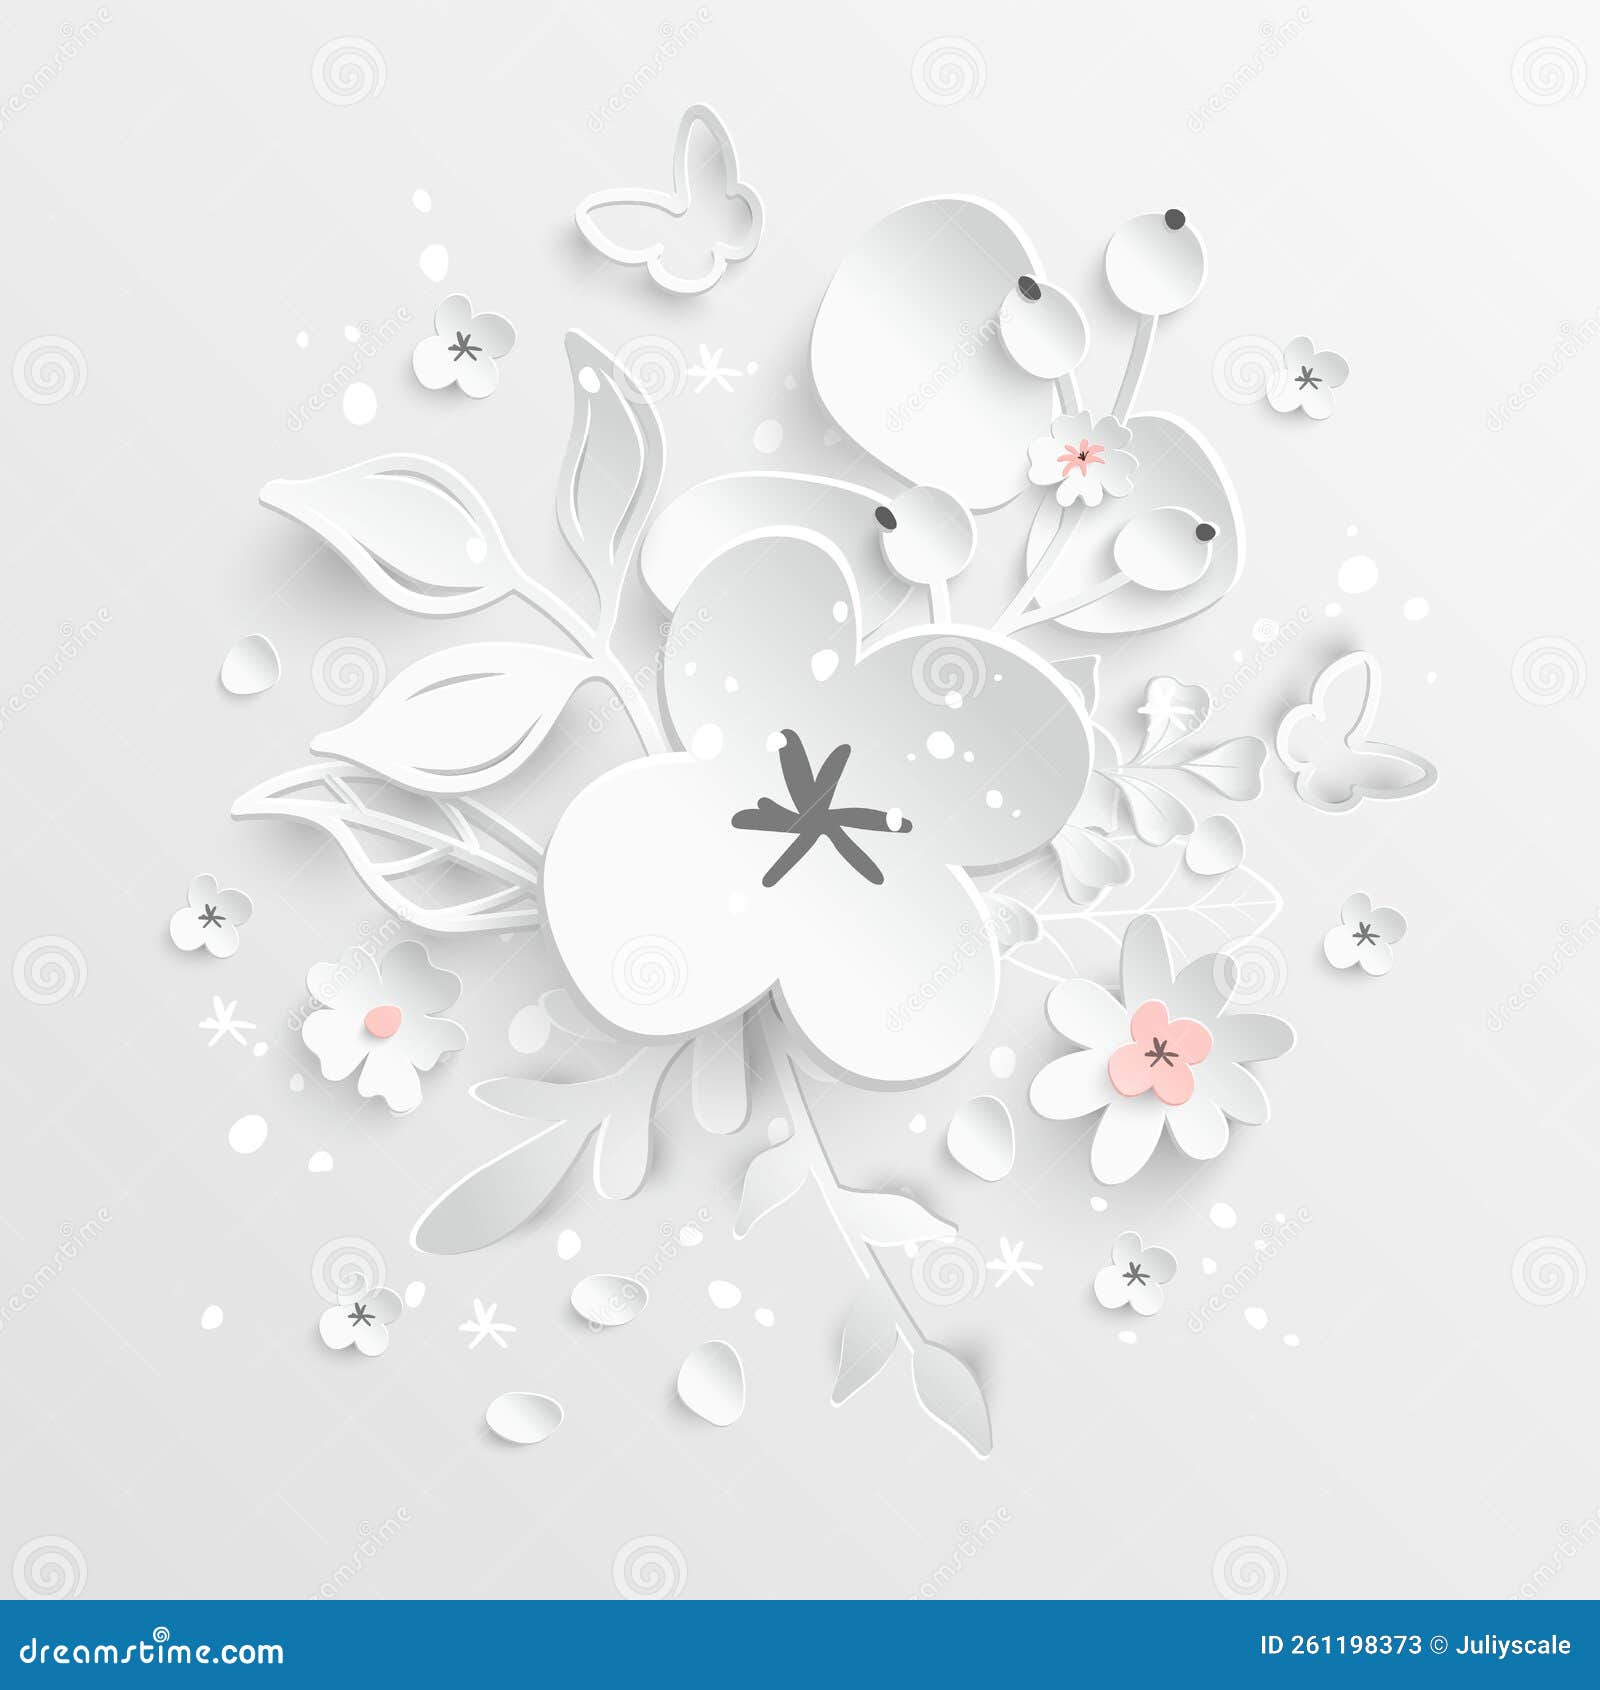 White Paper Flower Stock Photos, Images and Backgrounds for Free Download